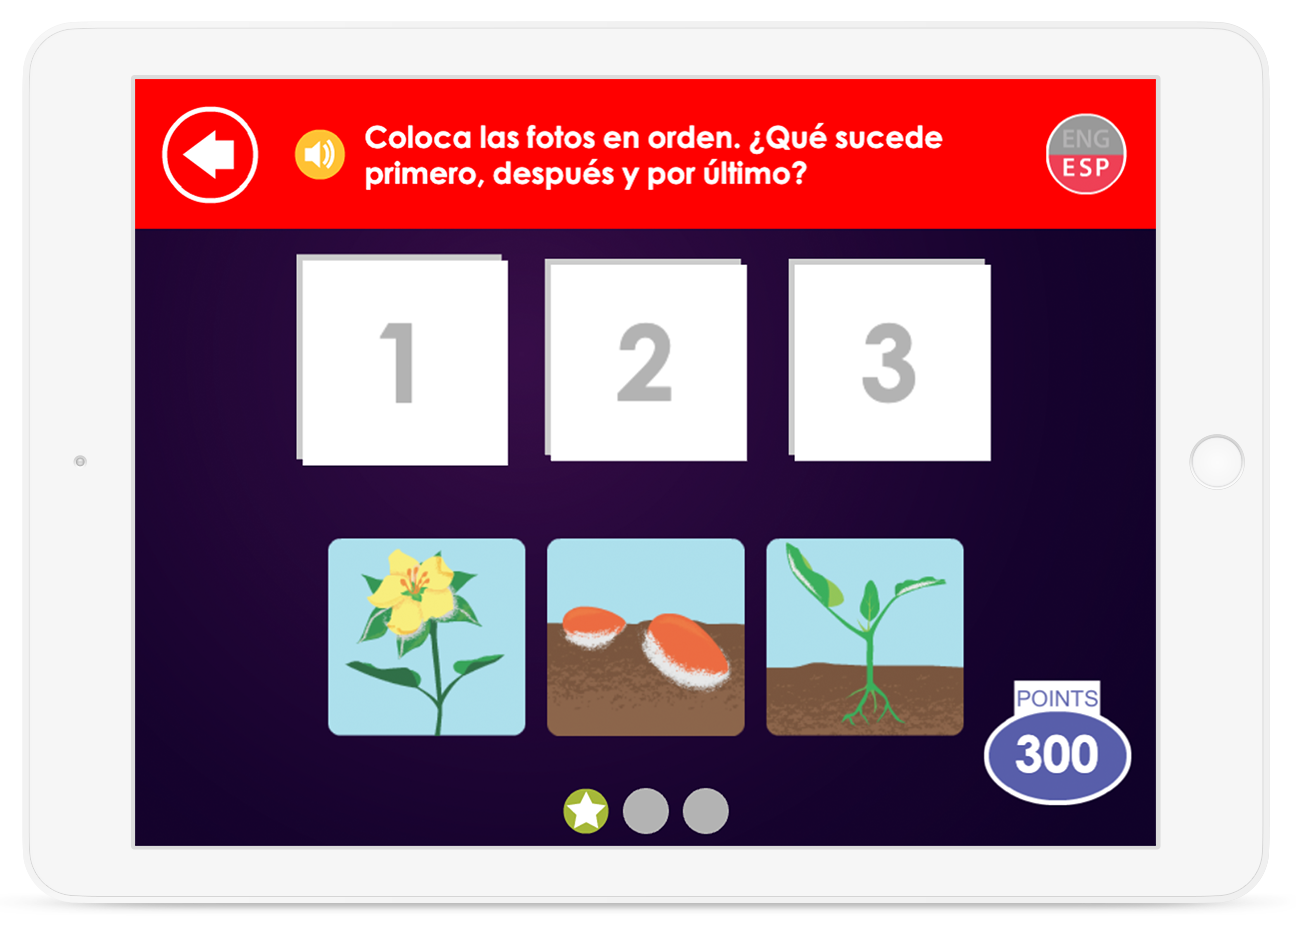 Learn science concepts by playing games that teach vocabulary, logic and reasoning.